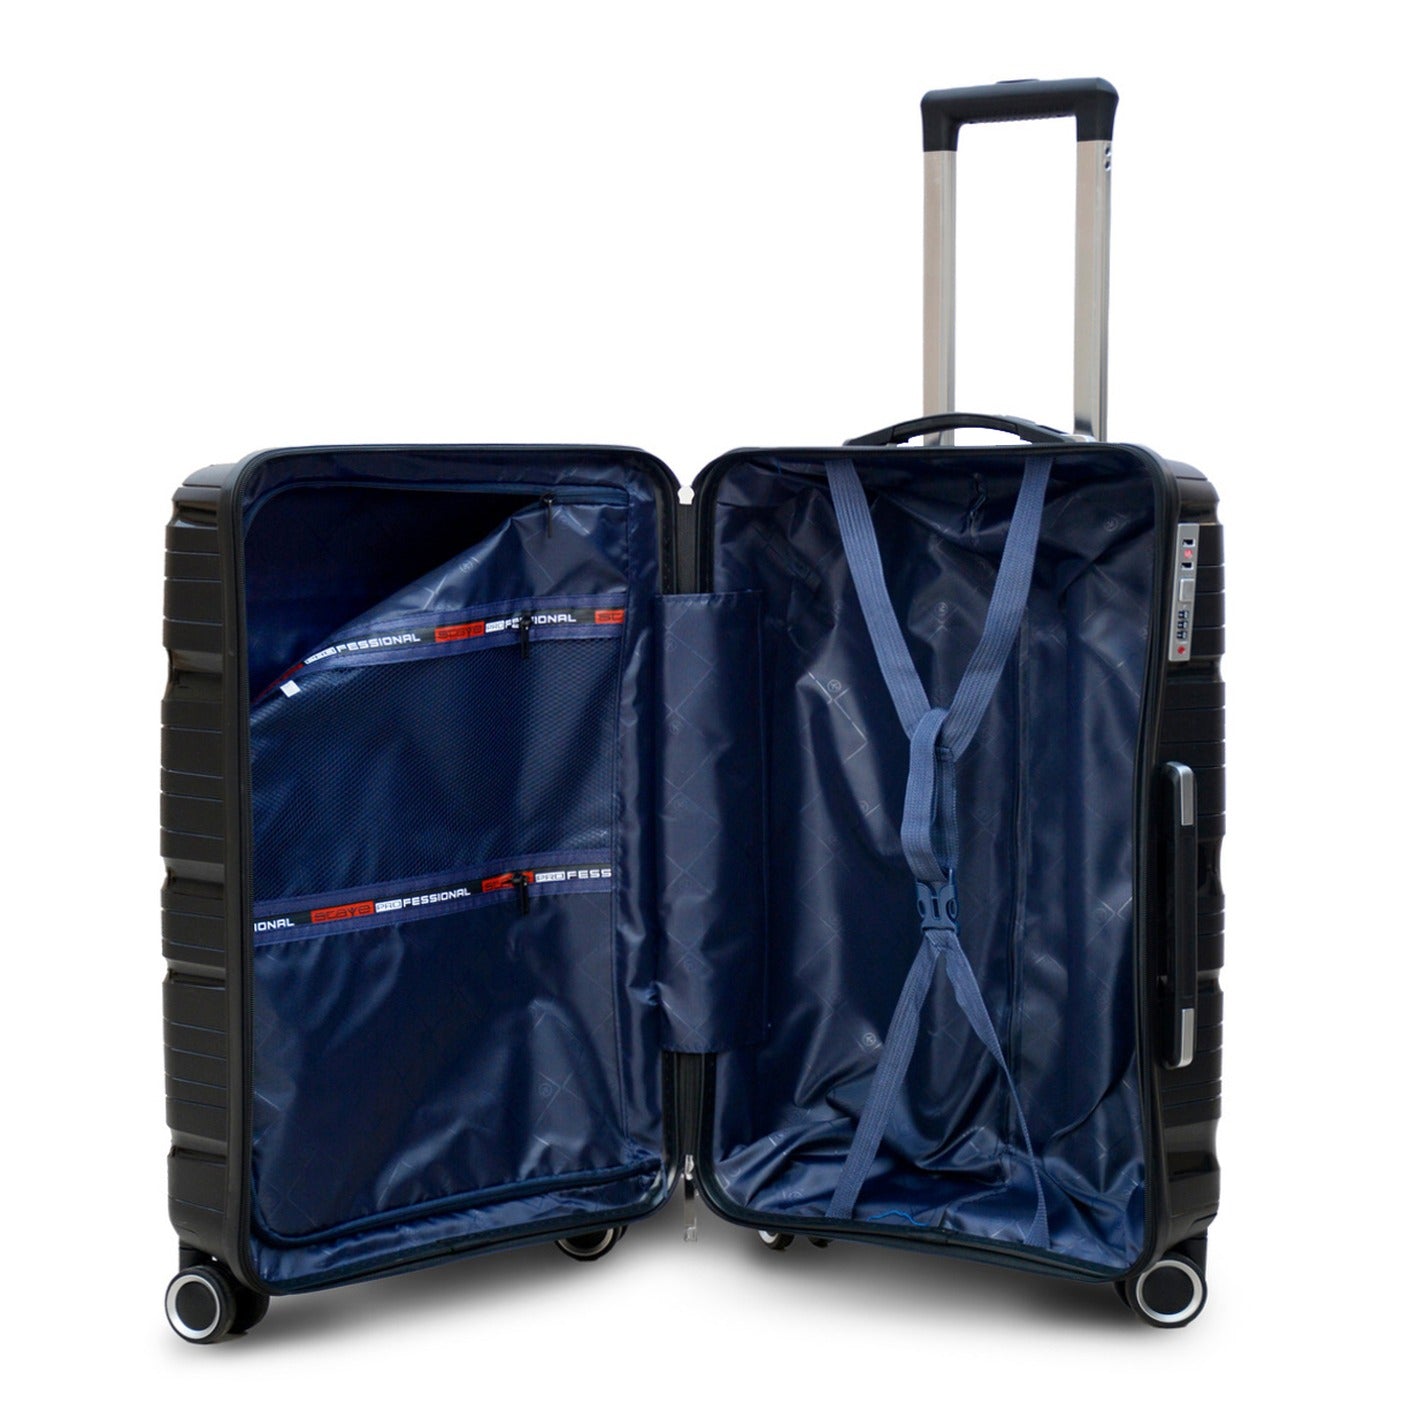 20" Black Colour Royal PP Lightweight Hard Case Carry On Trolley Bag With Double Spinner Wheel